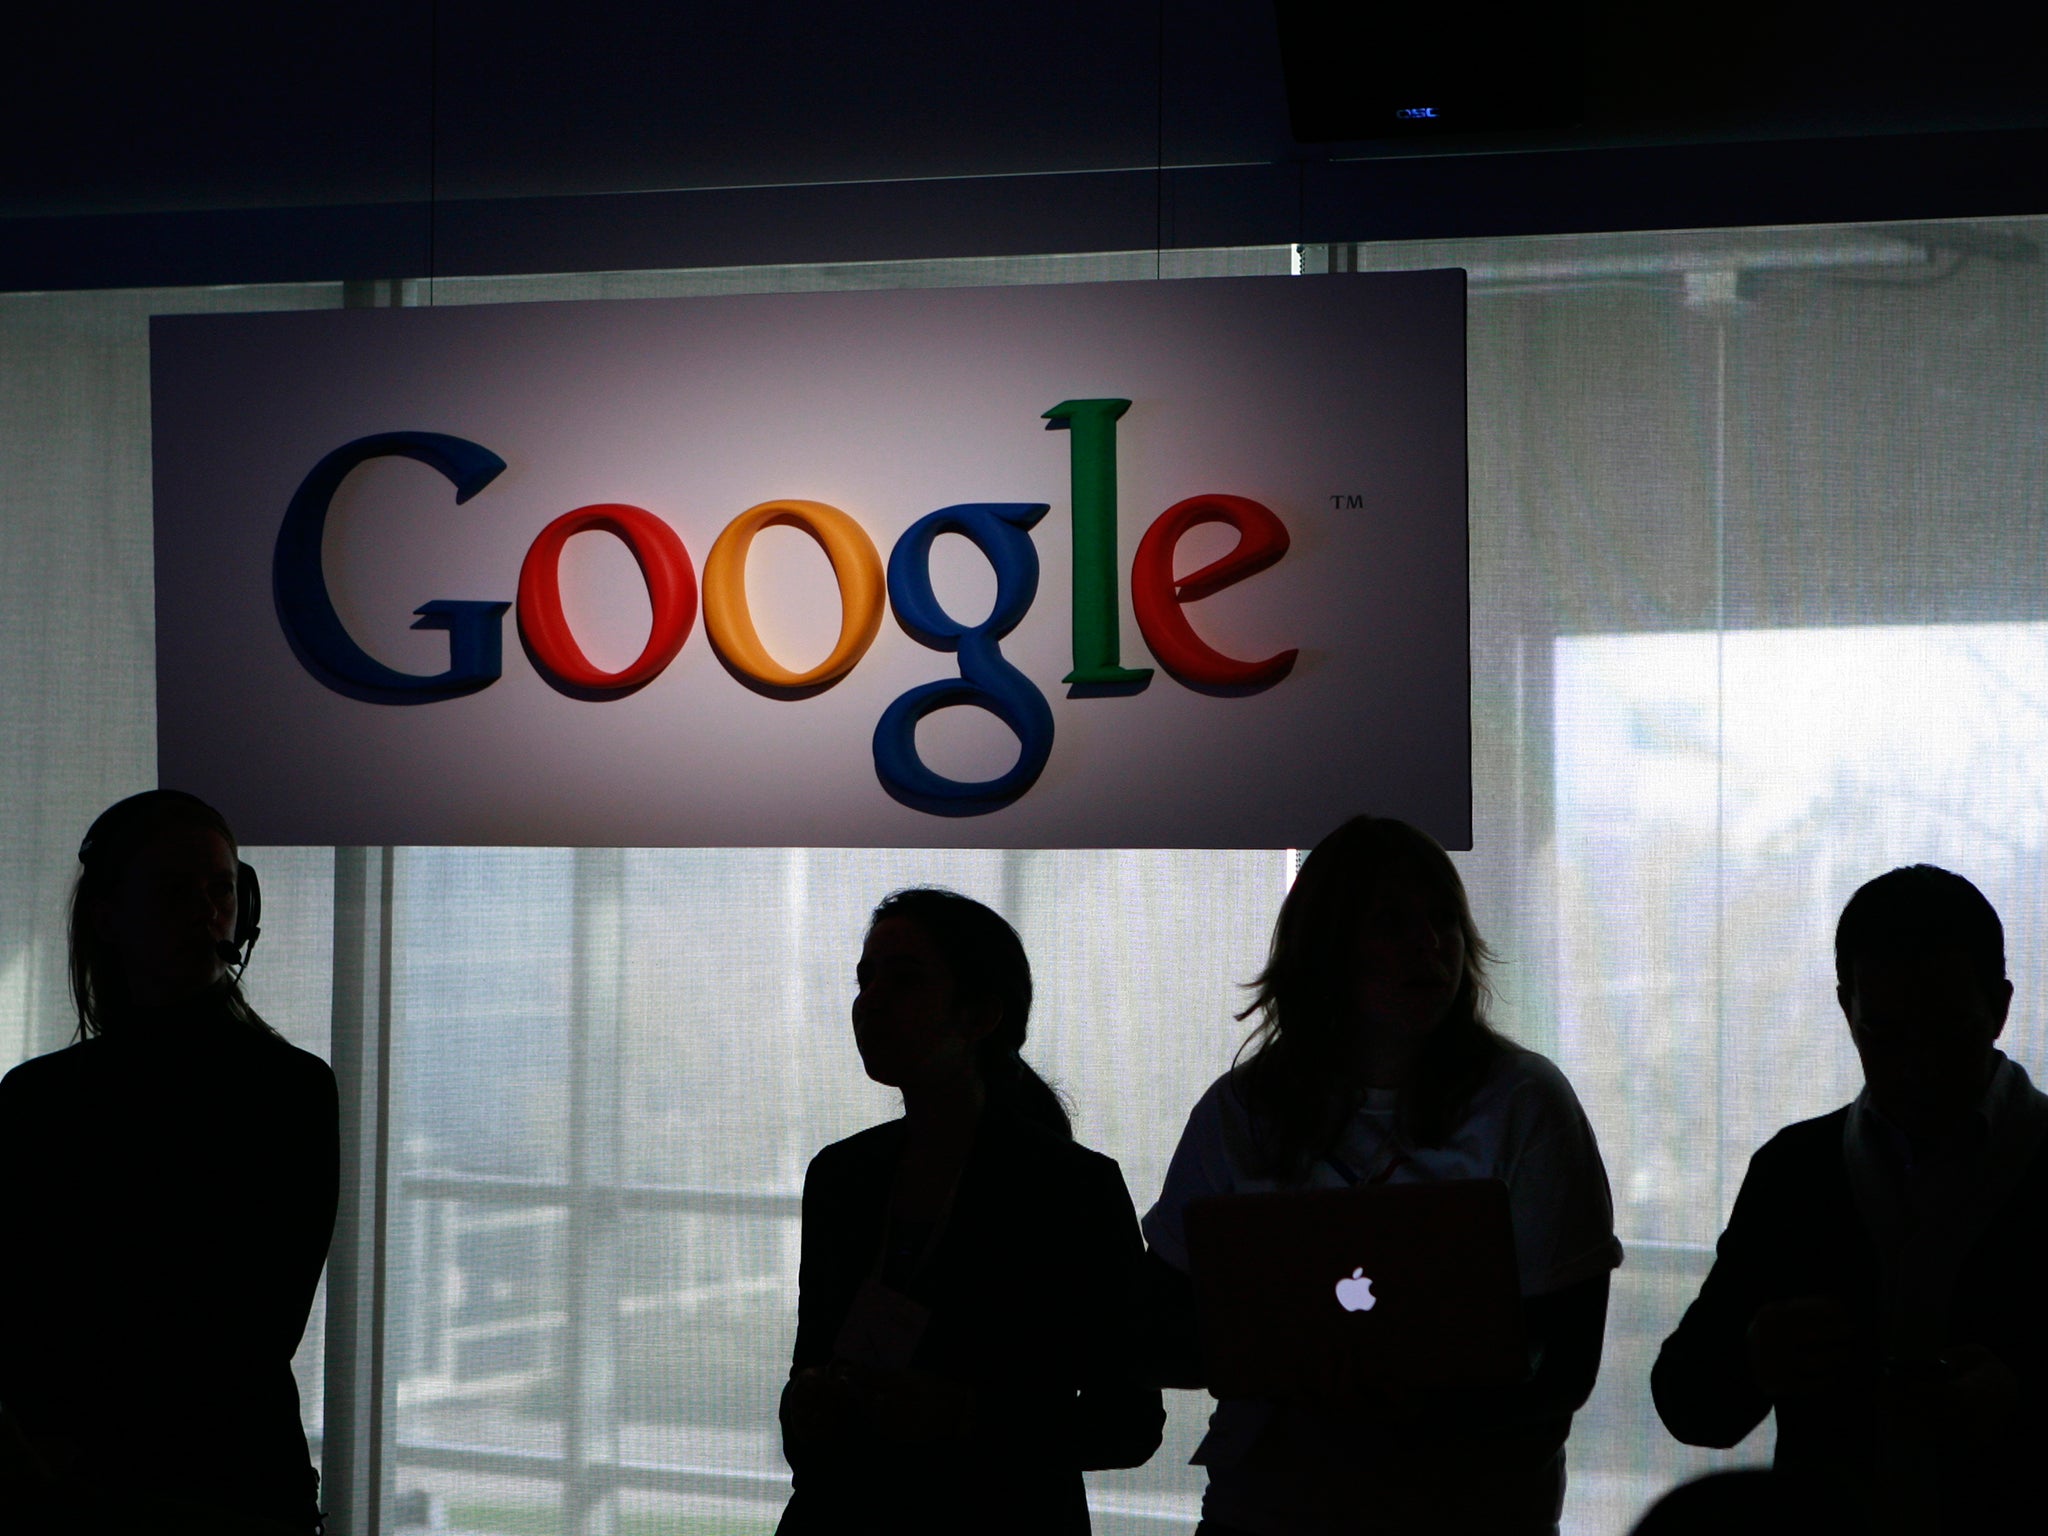 Google is being accused of an invasion of privacy by managing to bypass Apple’s security